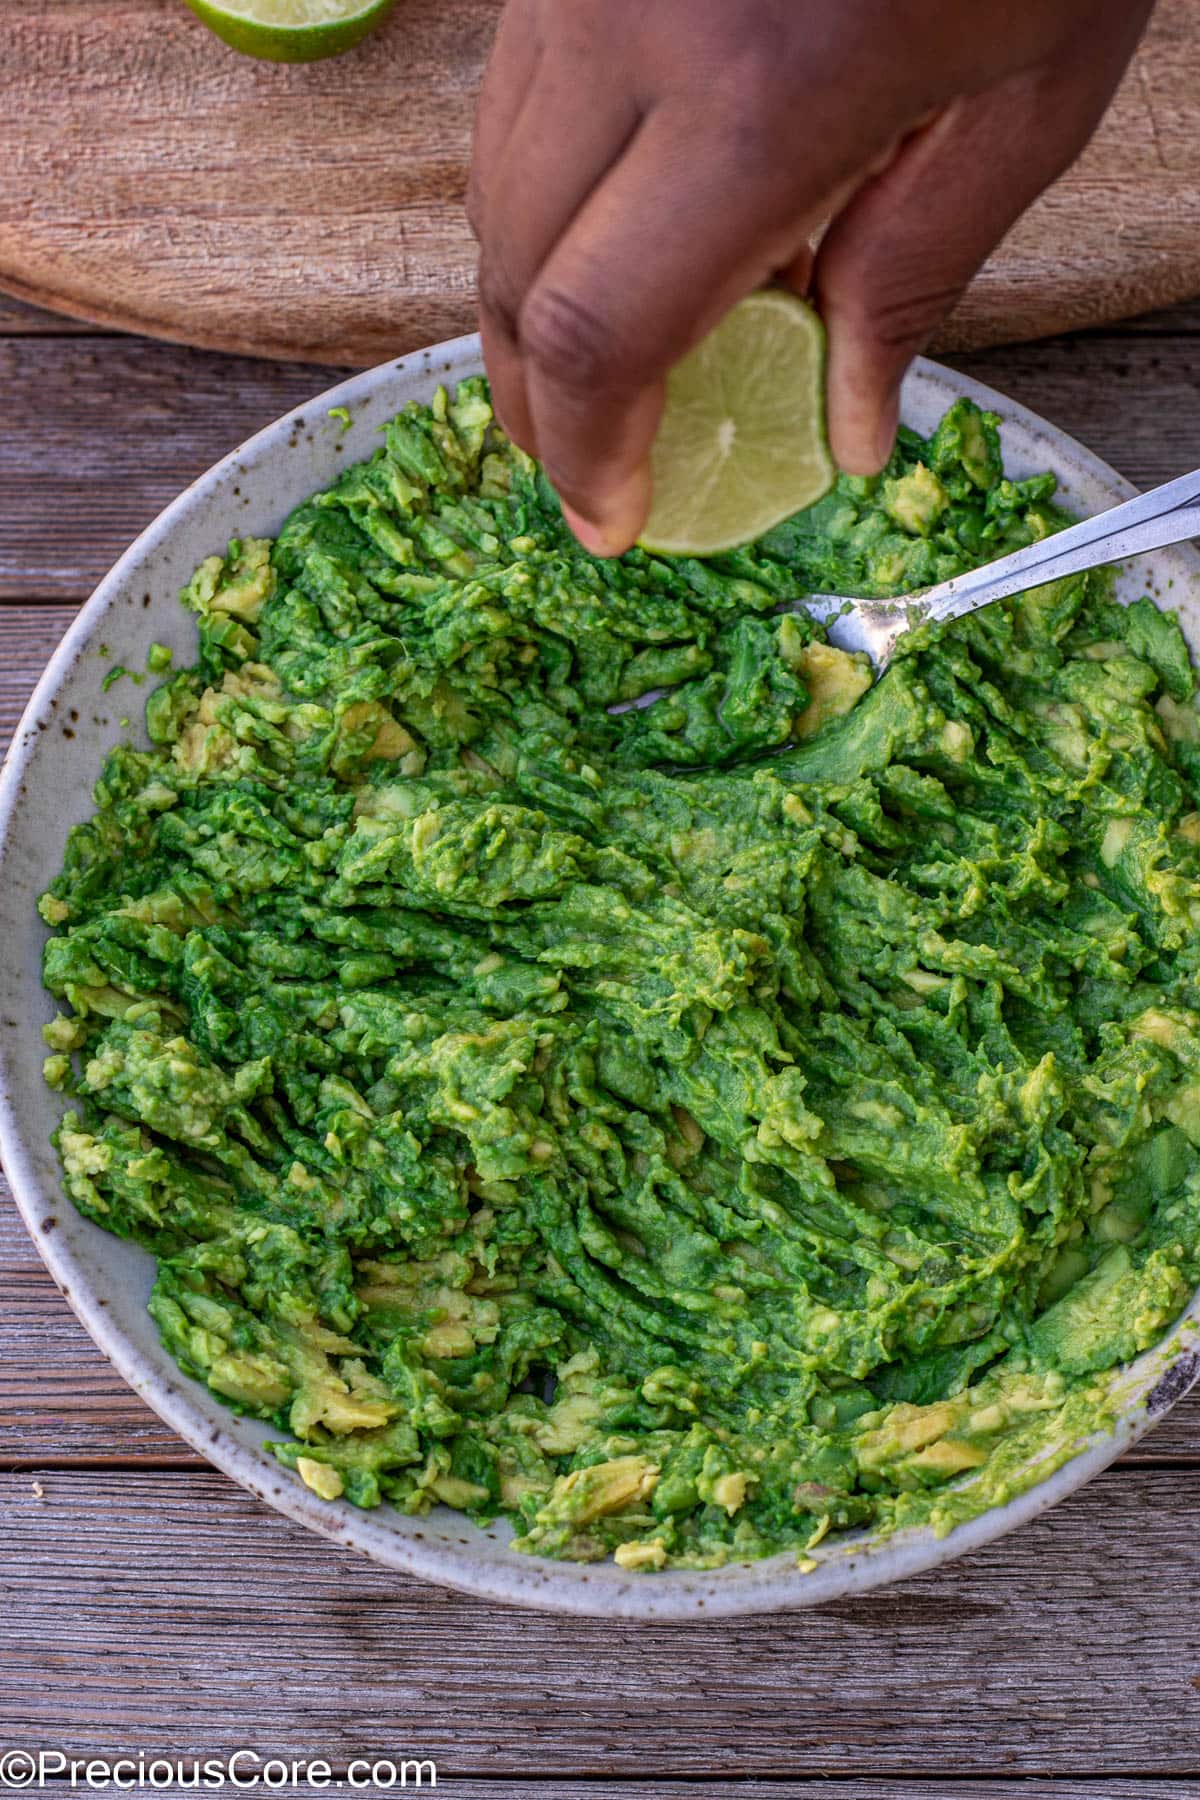 Squeezing lime juice into mashed avocados.